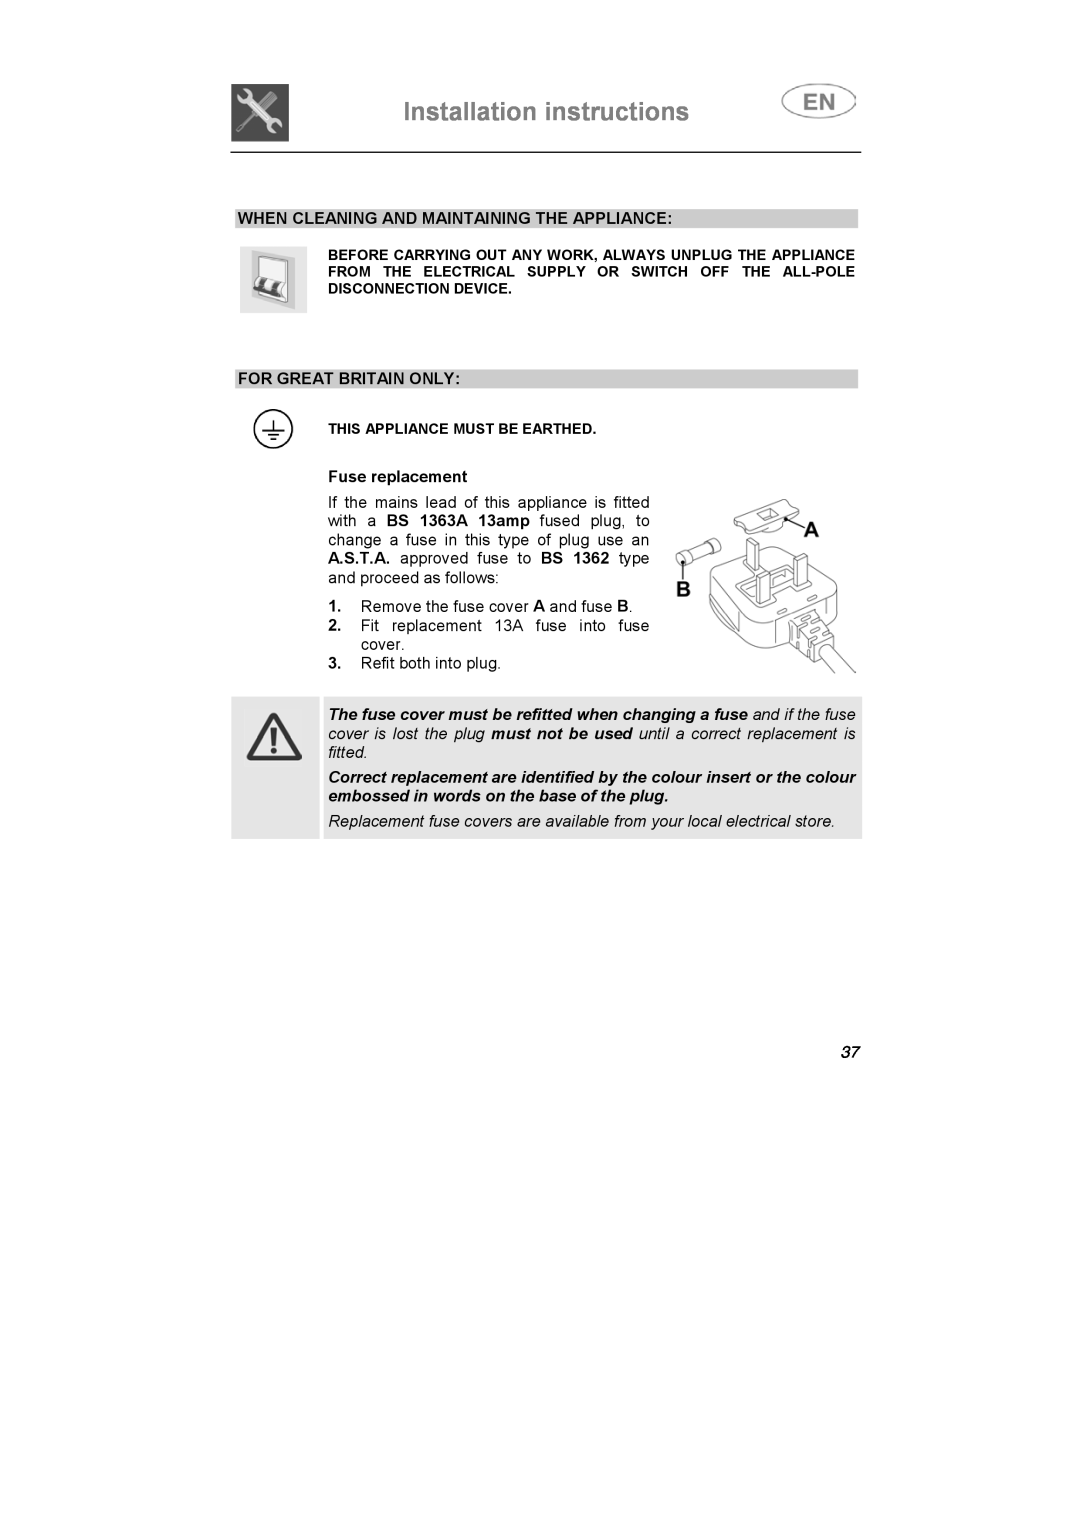 Smeg LSA6051B instruction manual When Cleaning And Maintaining The Appliance, For Great Britain Only, Fuse replacement 